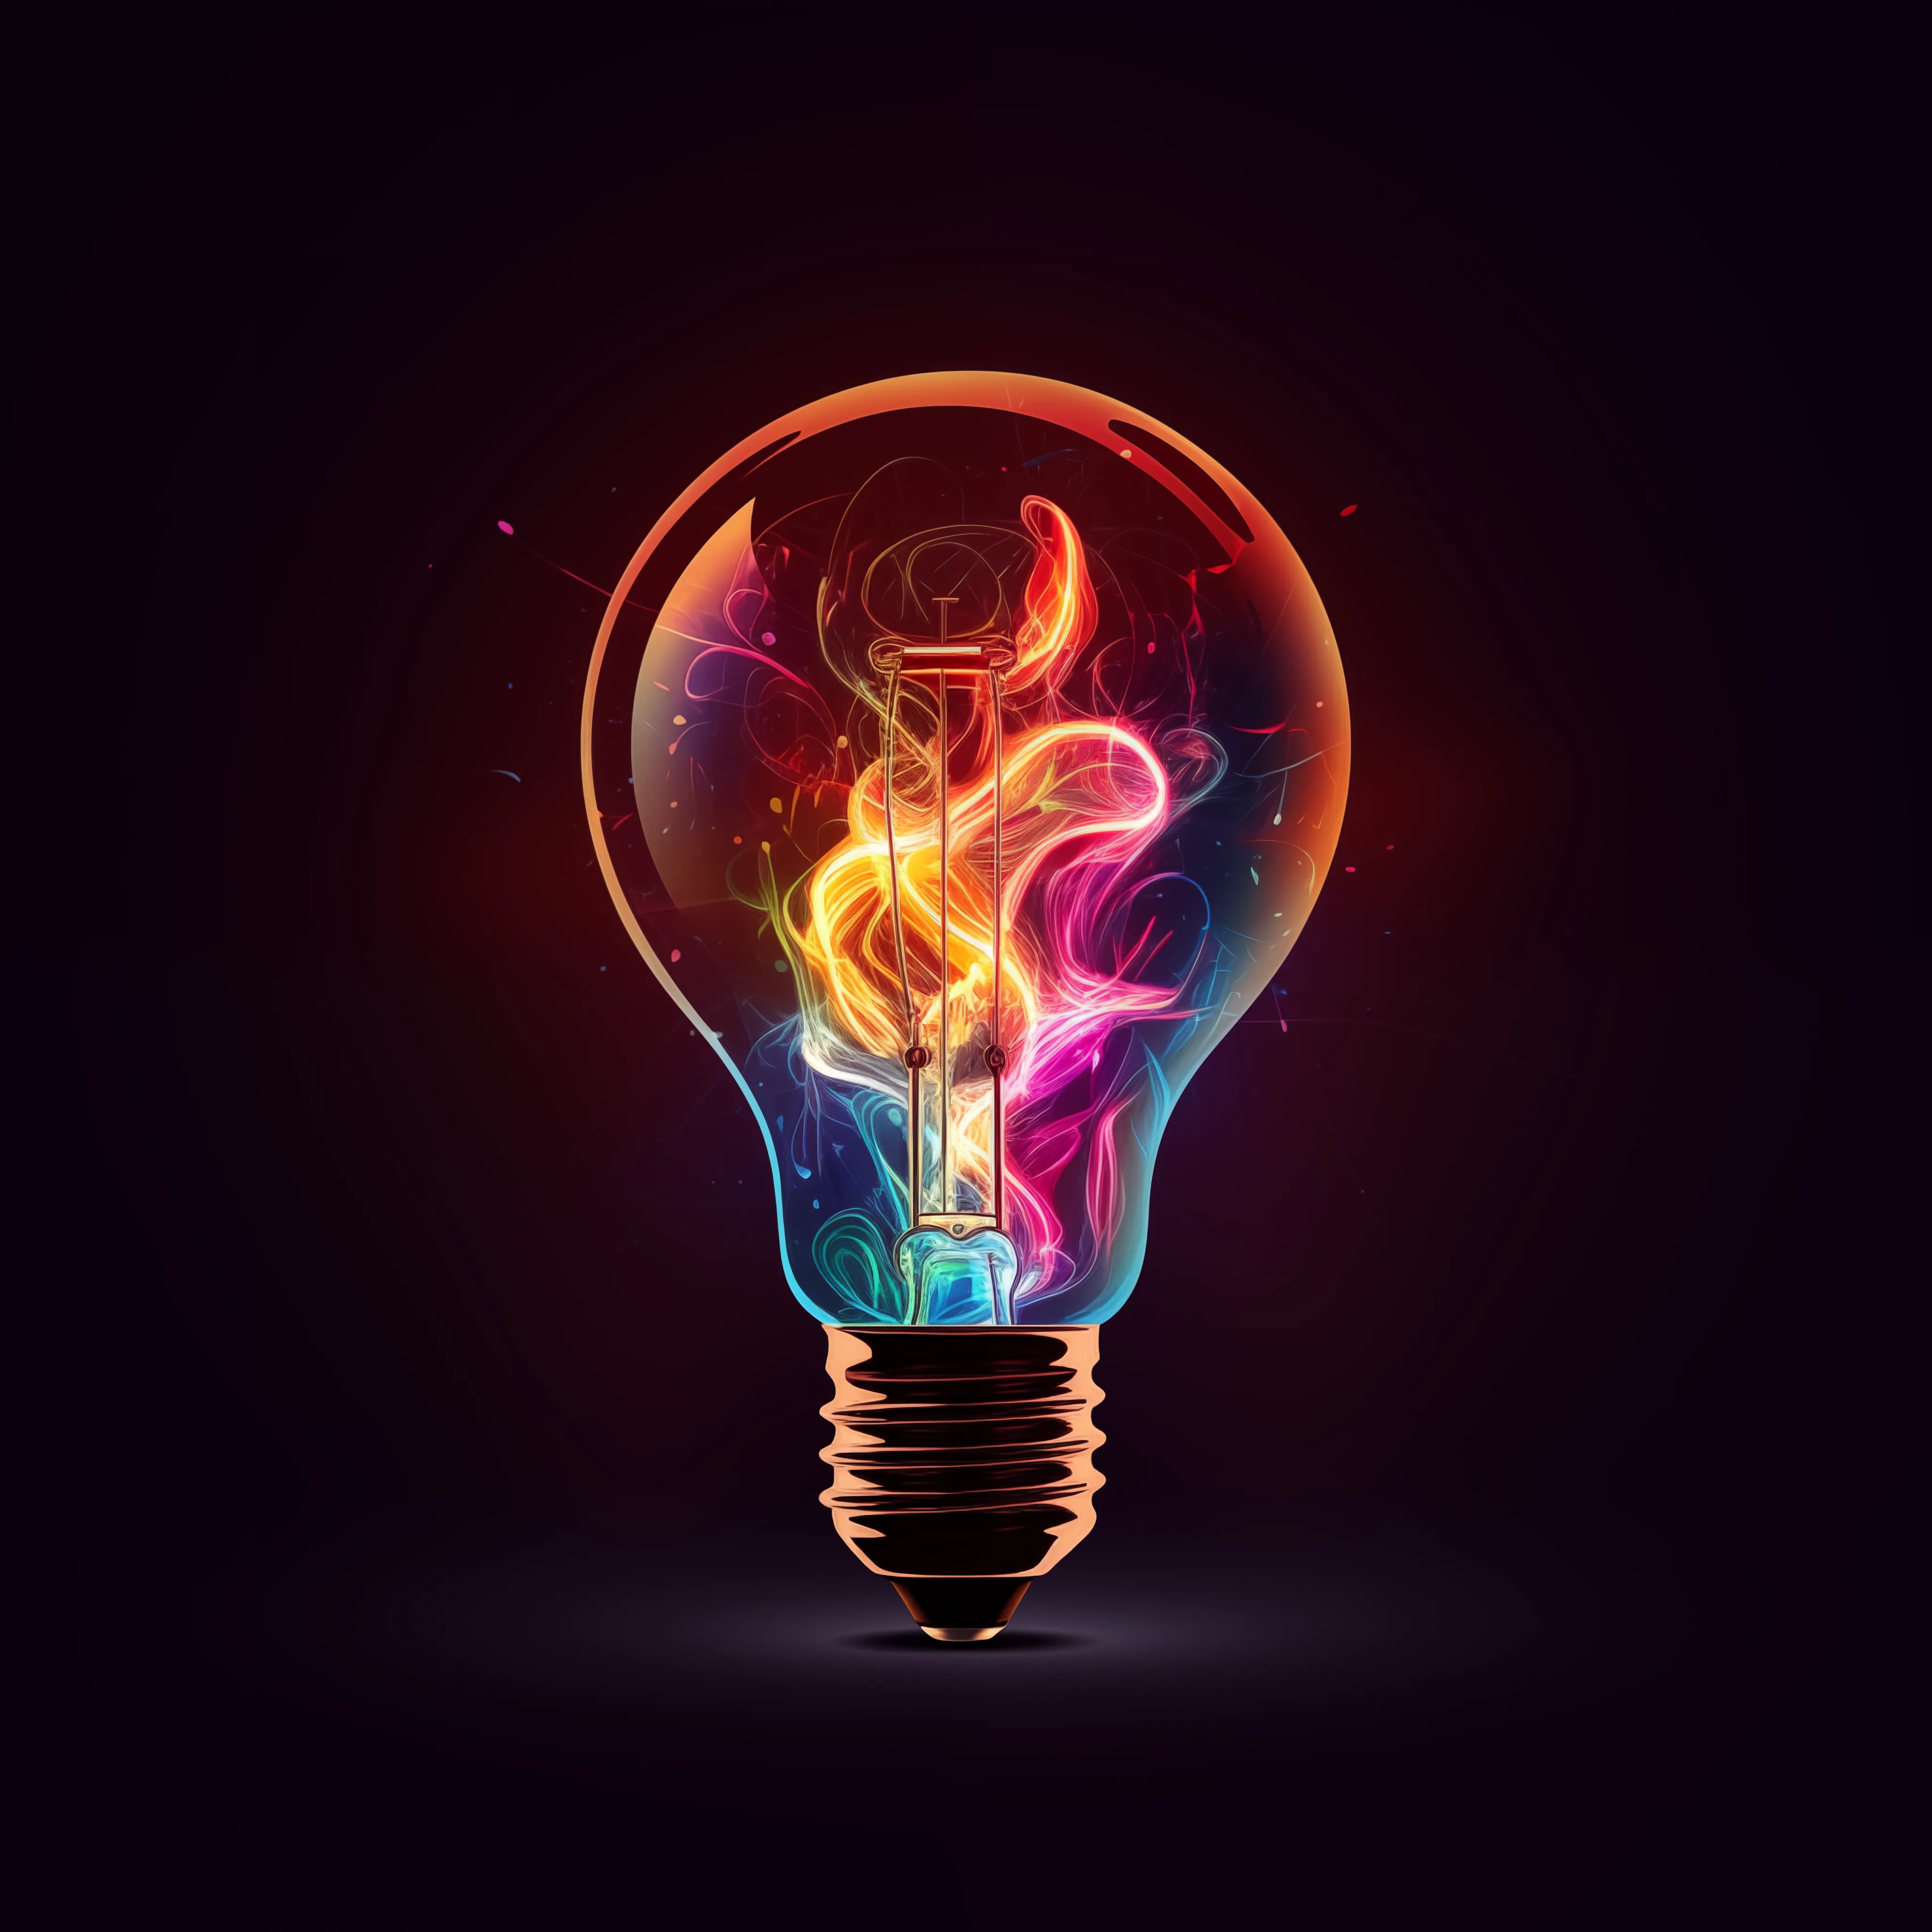 A glowing light bulb with a vibrant flame, reminiscent of a rainbow, displayed on a black background.